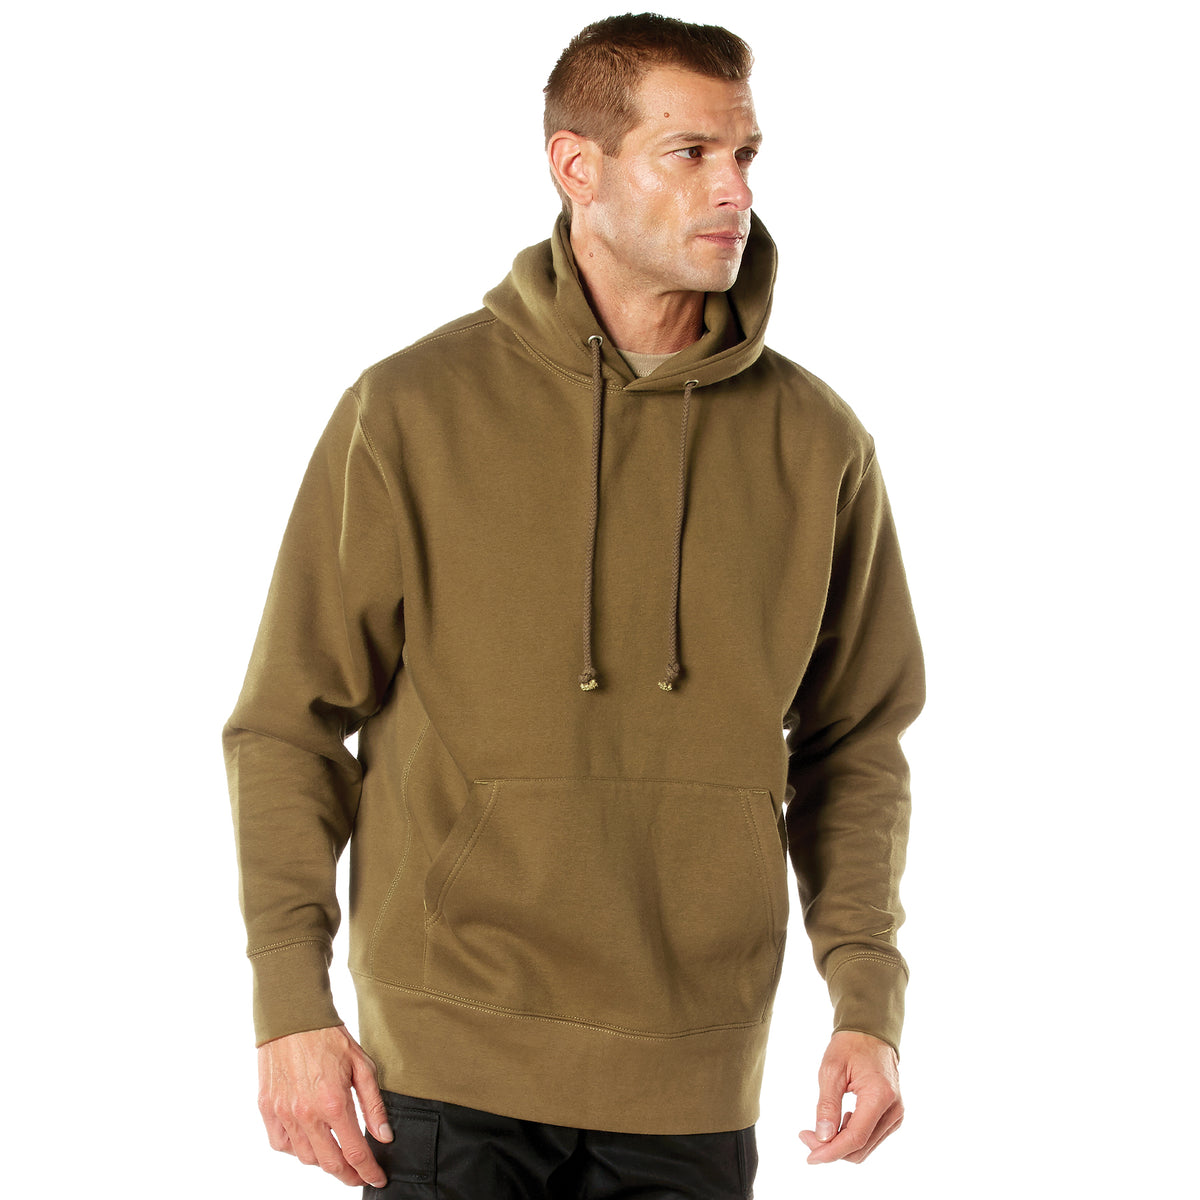 Rothco Every Day Pullover Hooded Sweatshirt Coyote